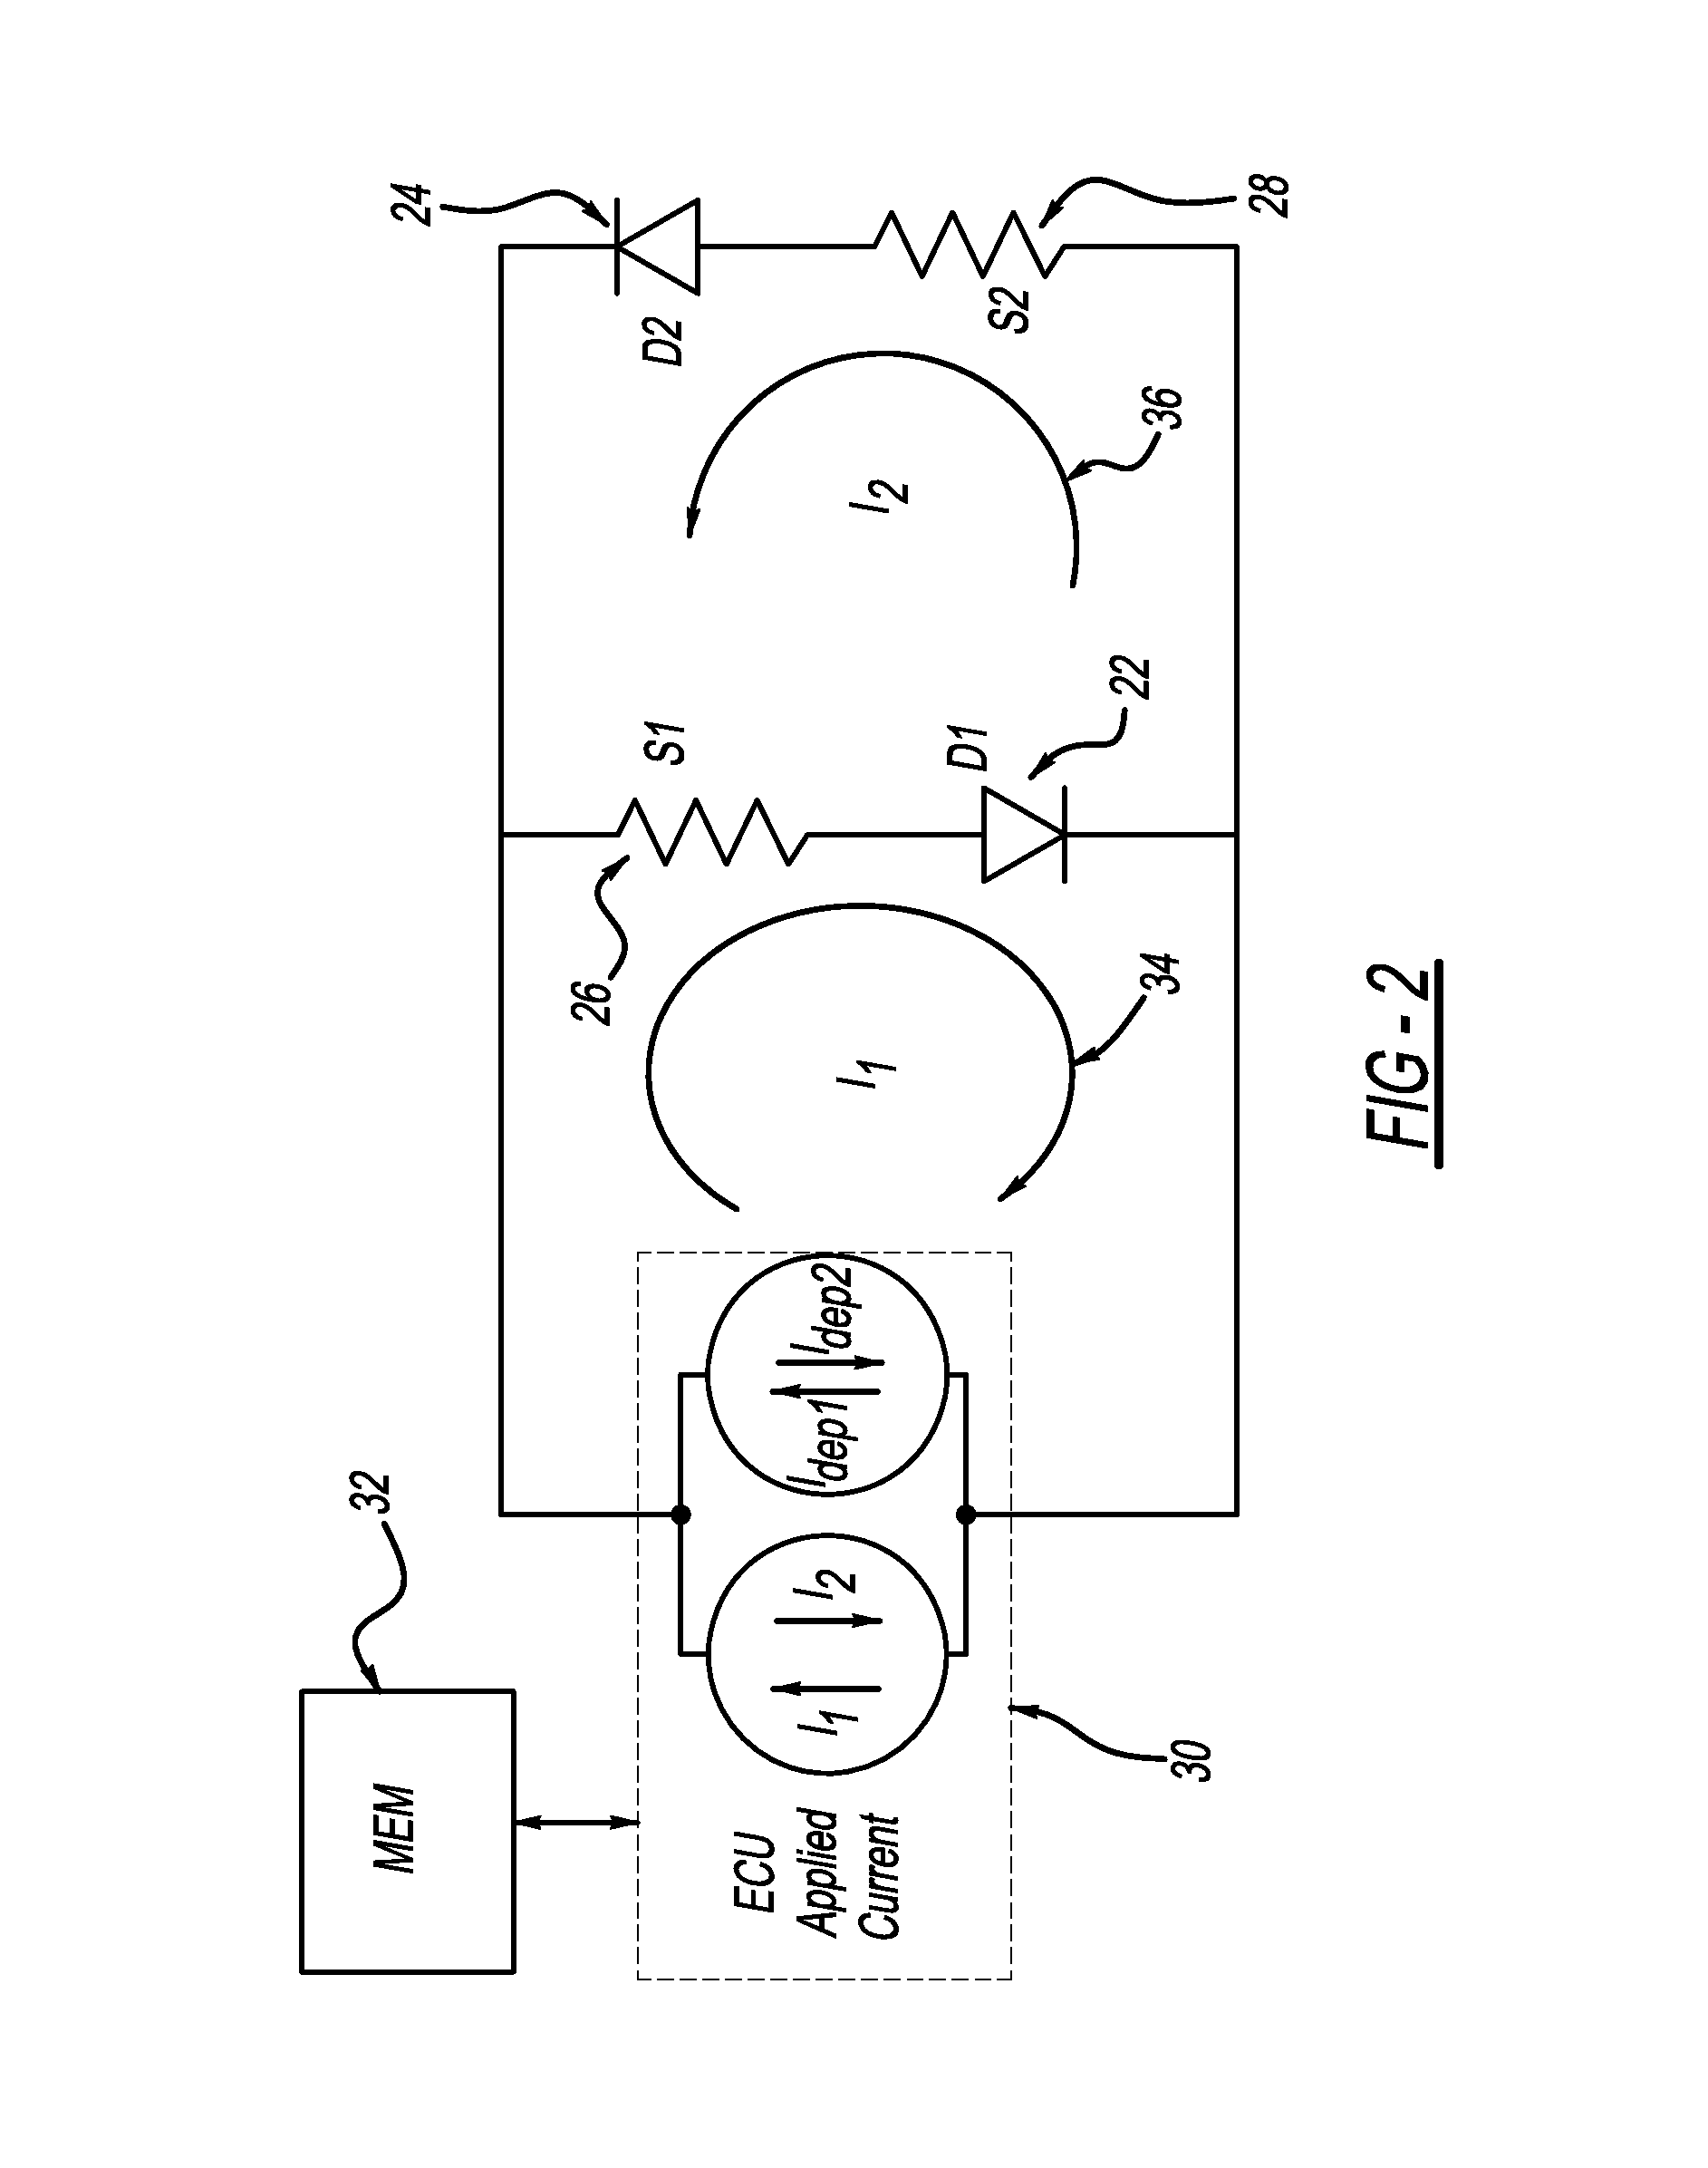 Method and System for Dianostic Measurement of Motor Vehicle Restraint System Squib Loop Resistance